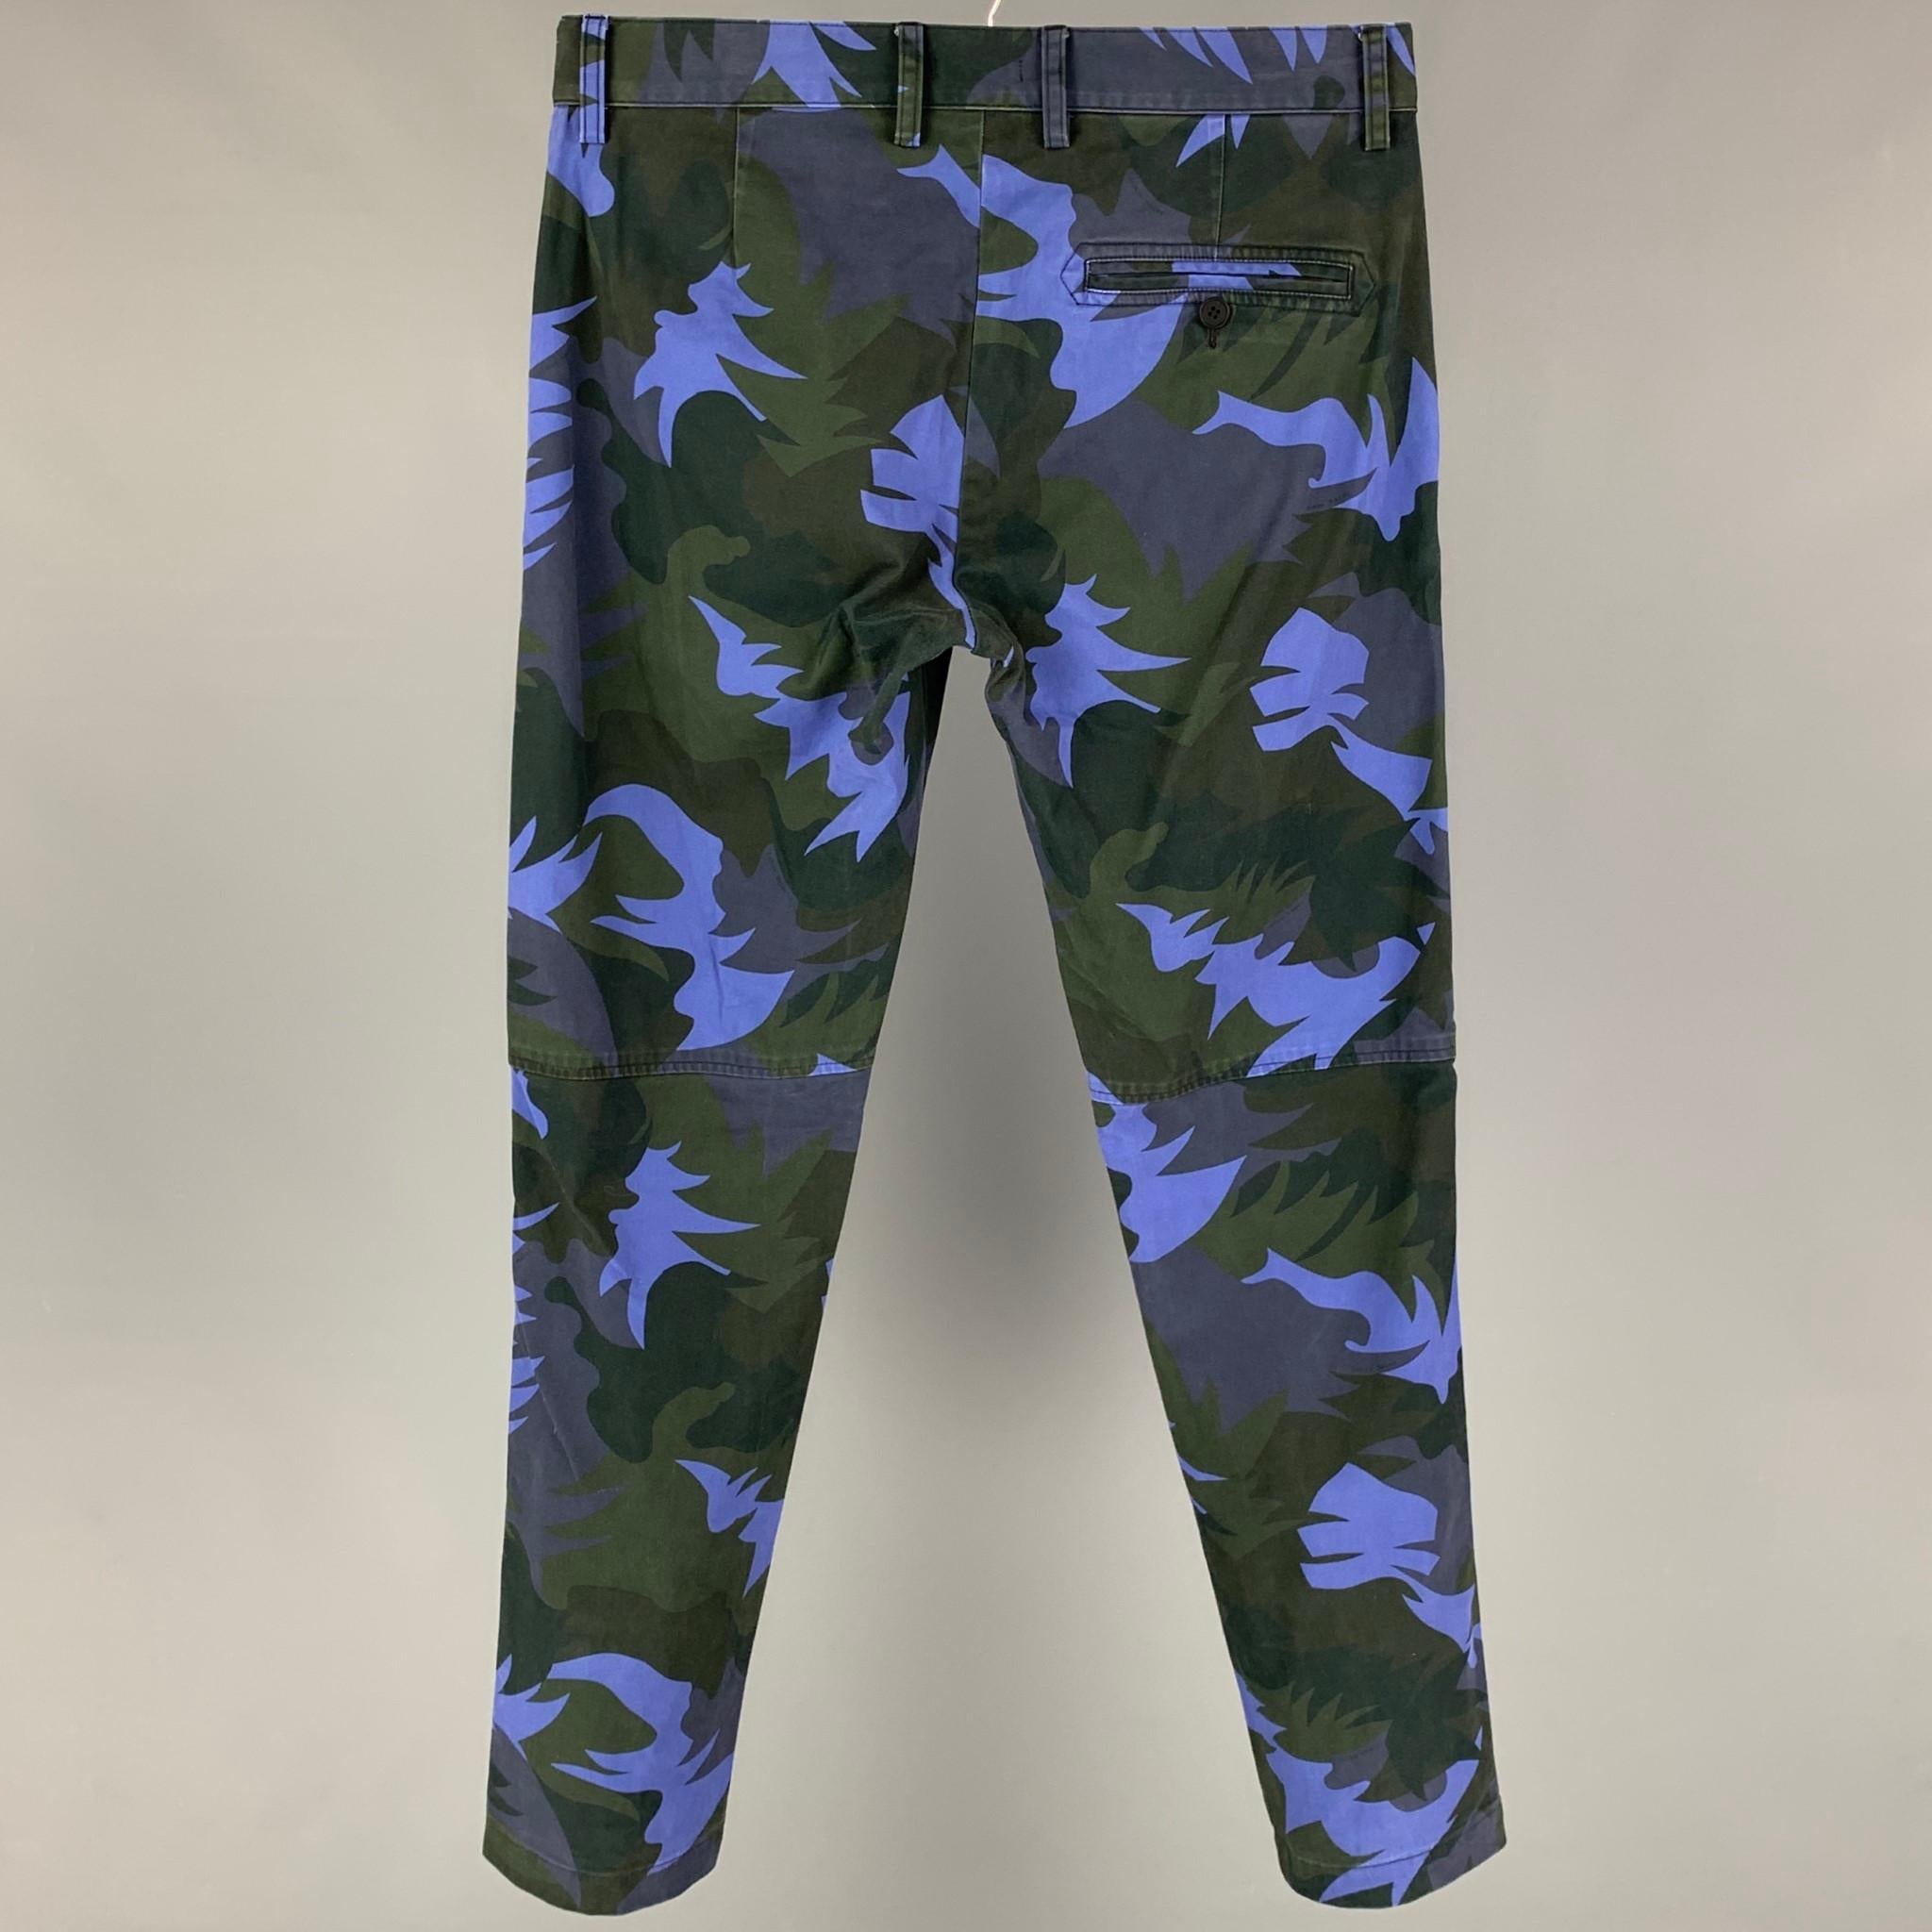 TOMAS MAIER 2018 pants comes in a blue & gray leaf print cotton featuring a slim fit, pocket details, and a zip fly closure. 

Very Good Pre-Owned Condition.
Marked: 31

Measurements:

Waist: 30 in.
Rise: 10 in.
Inseam: 30 in. 